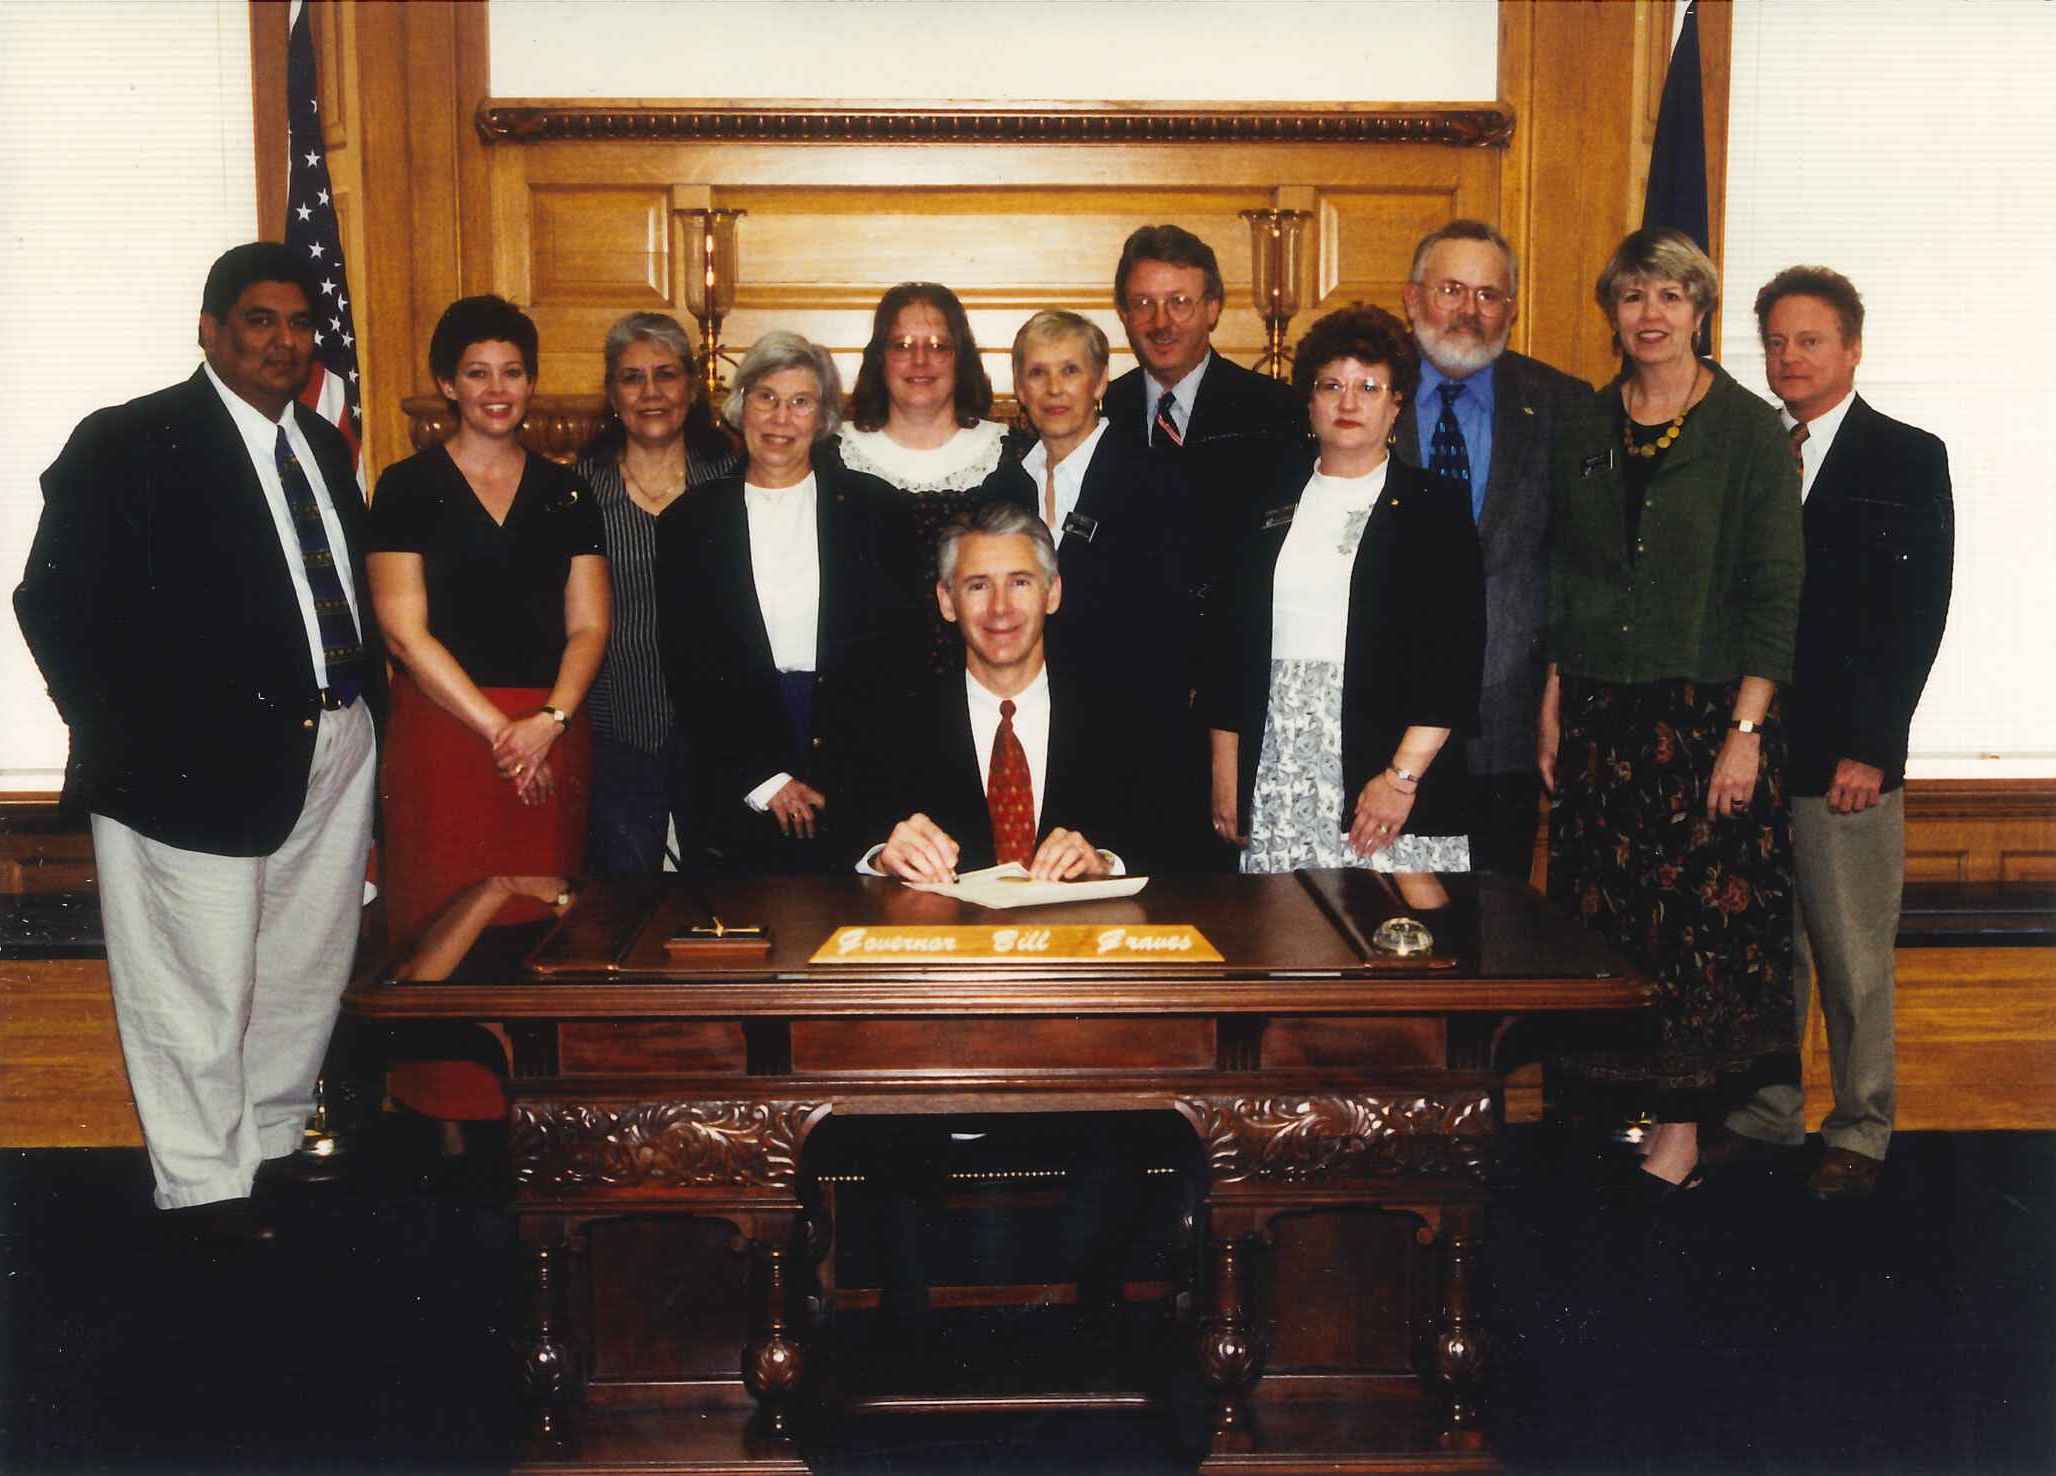 Governor Bill Graves signs proclamation